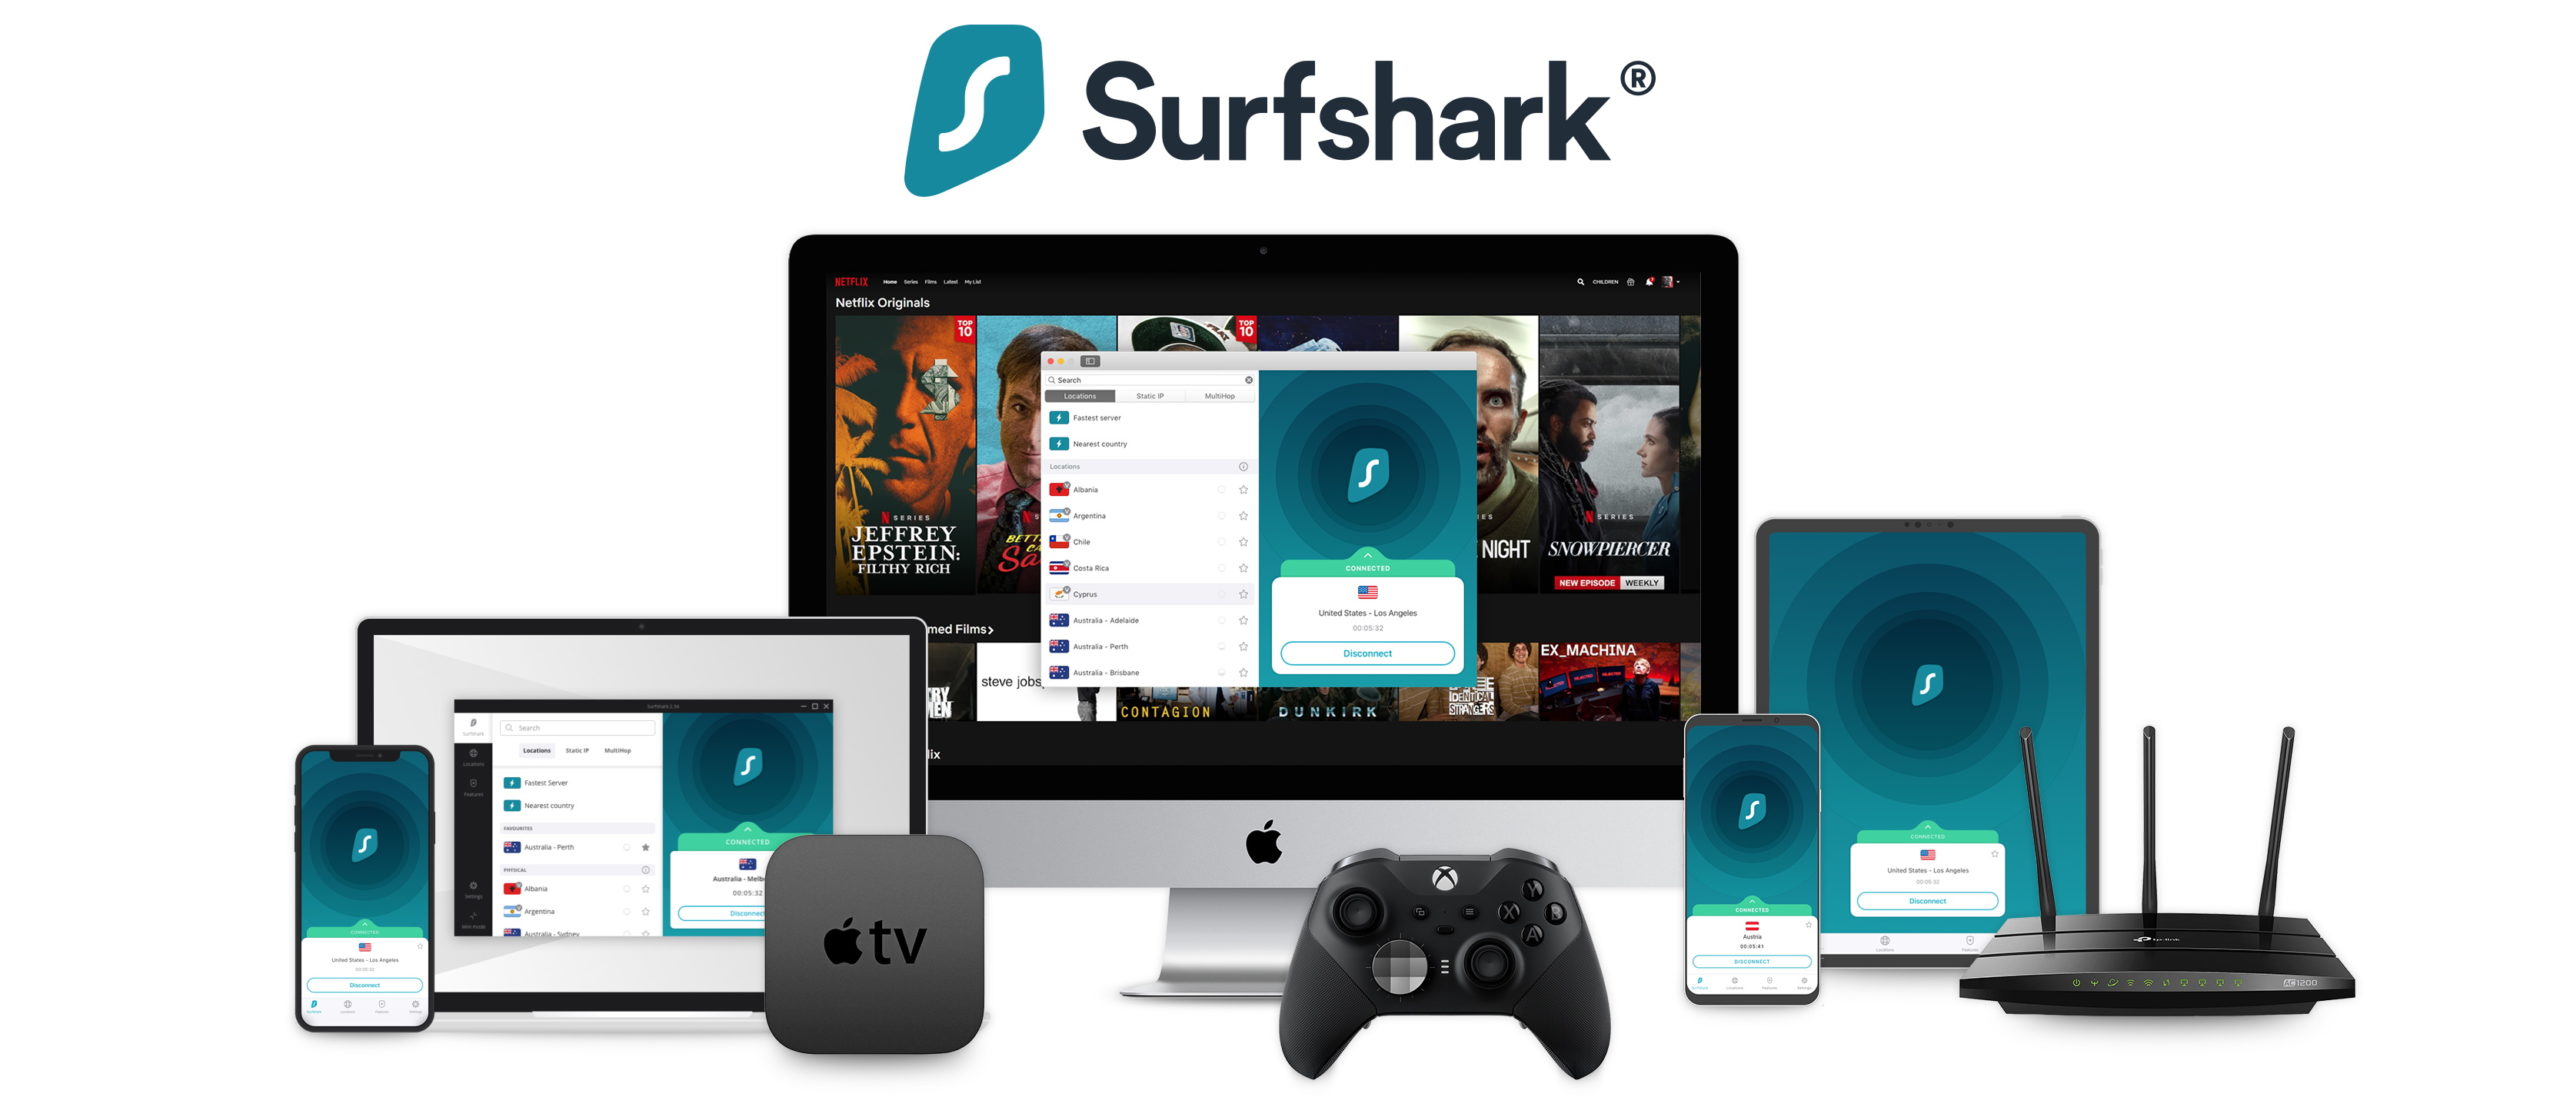 surfshark Compatibility with multiple devices